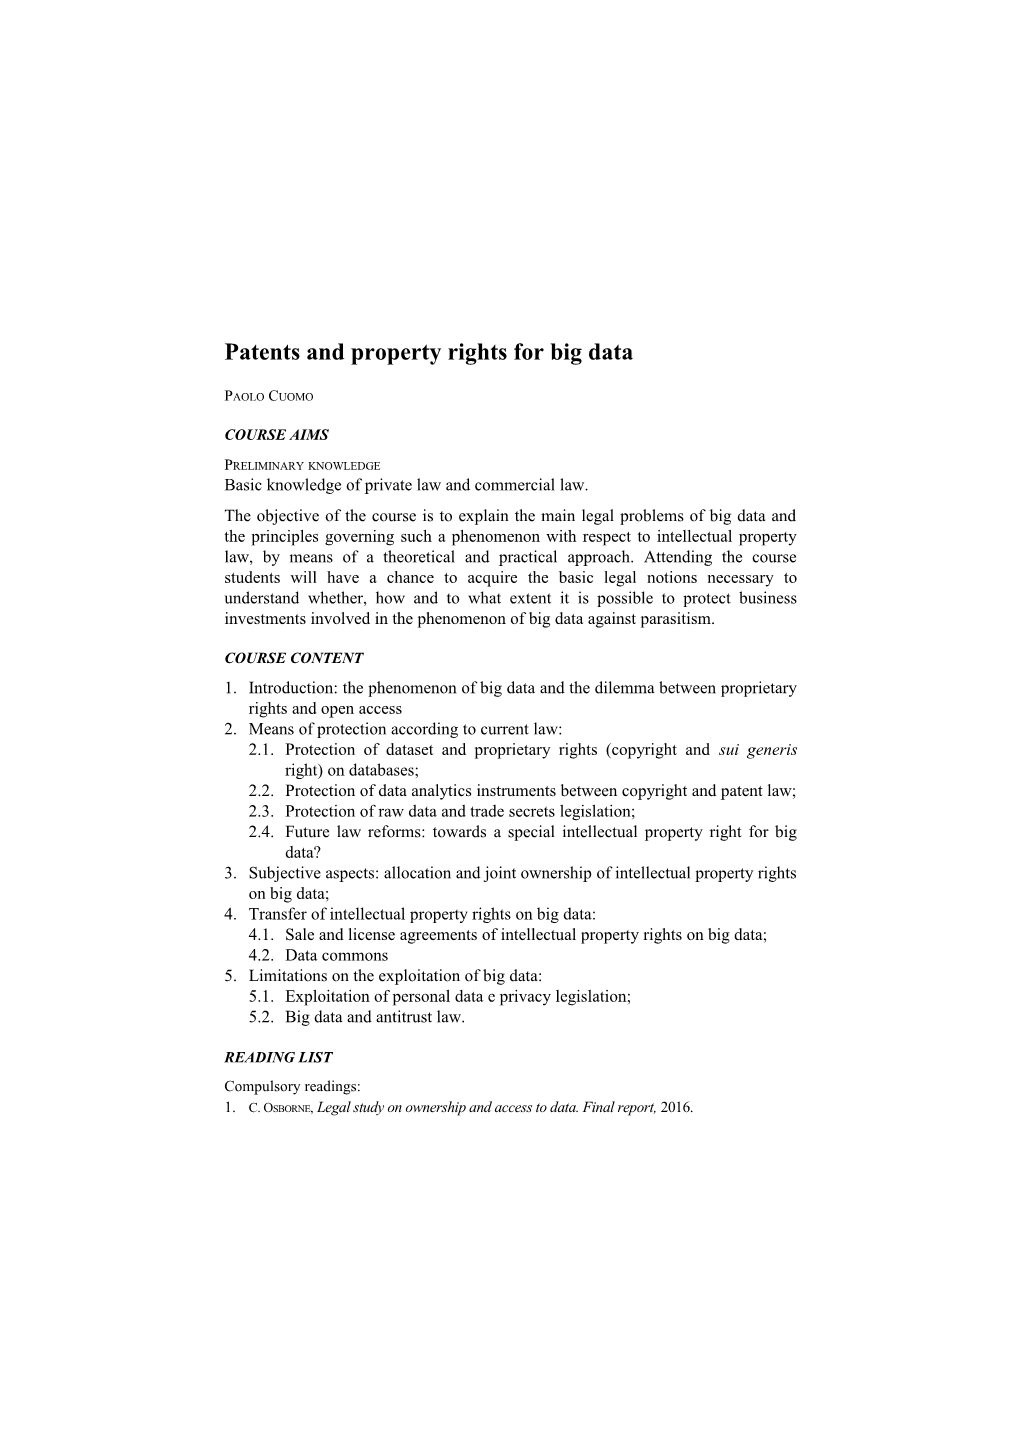 Patents and Property Rights for Big Data